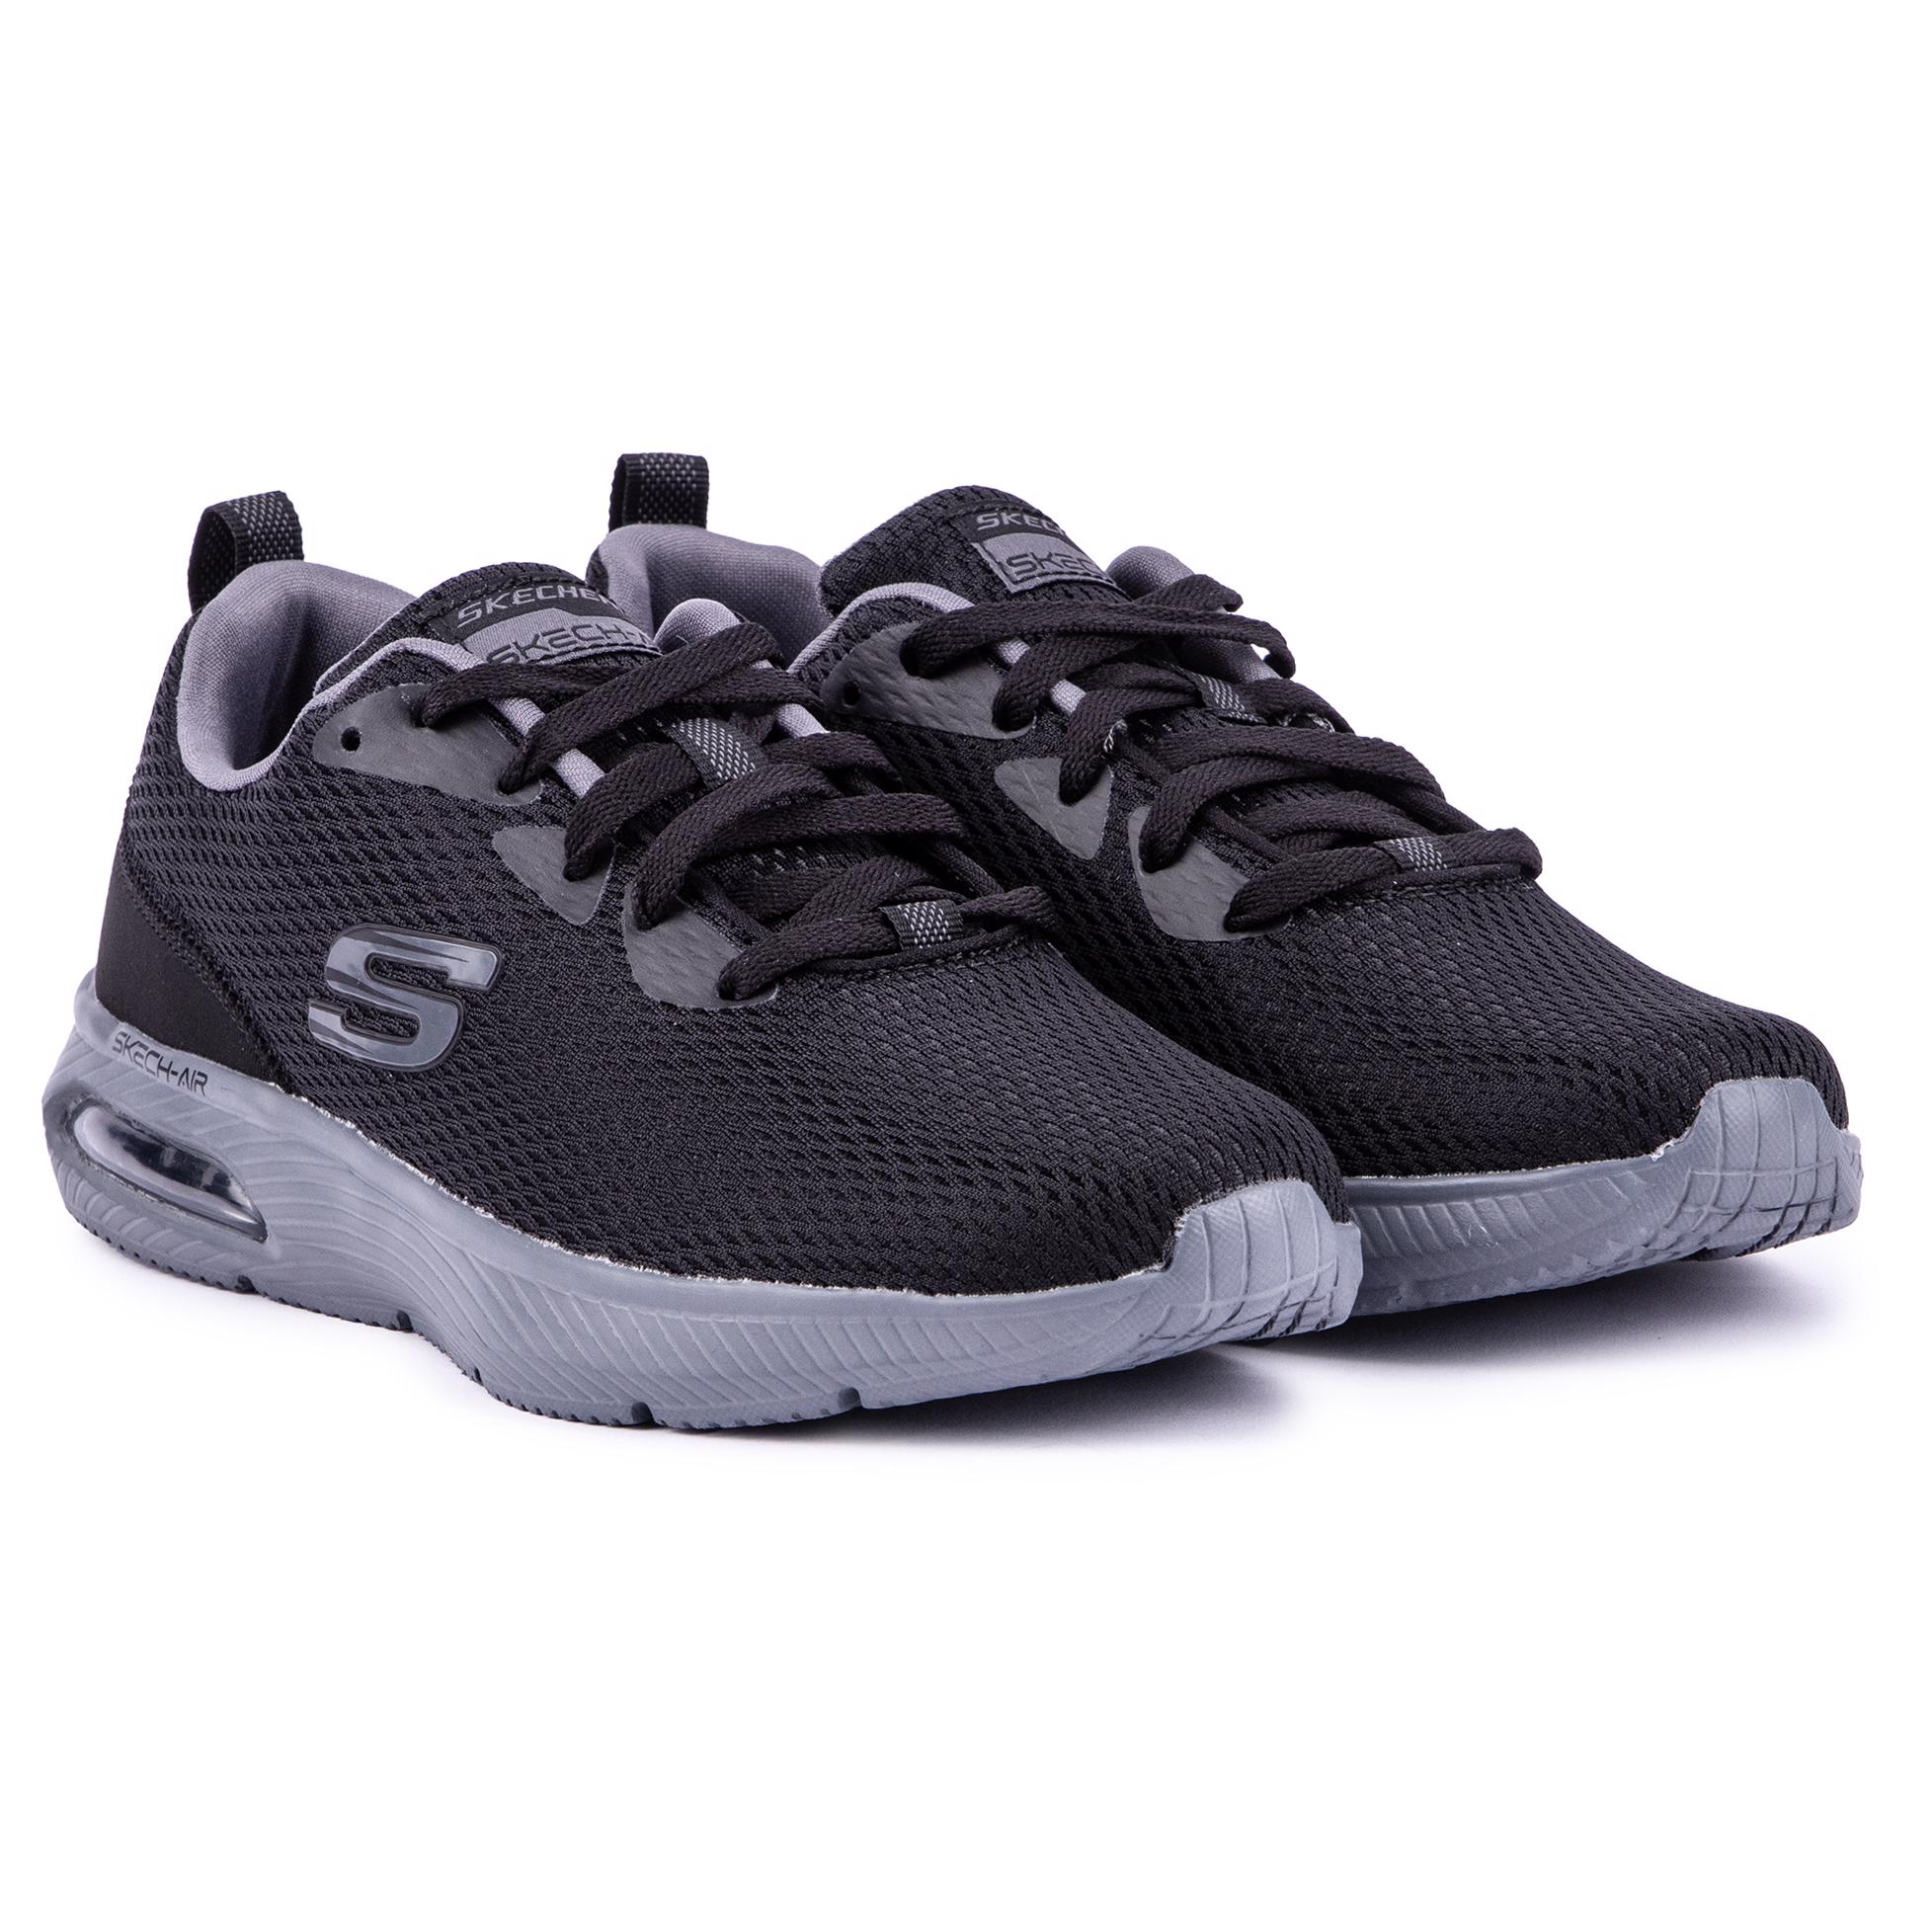 SKECHERS Mens Dyna-air Running Style Trainers Black